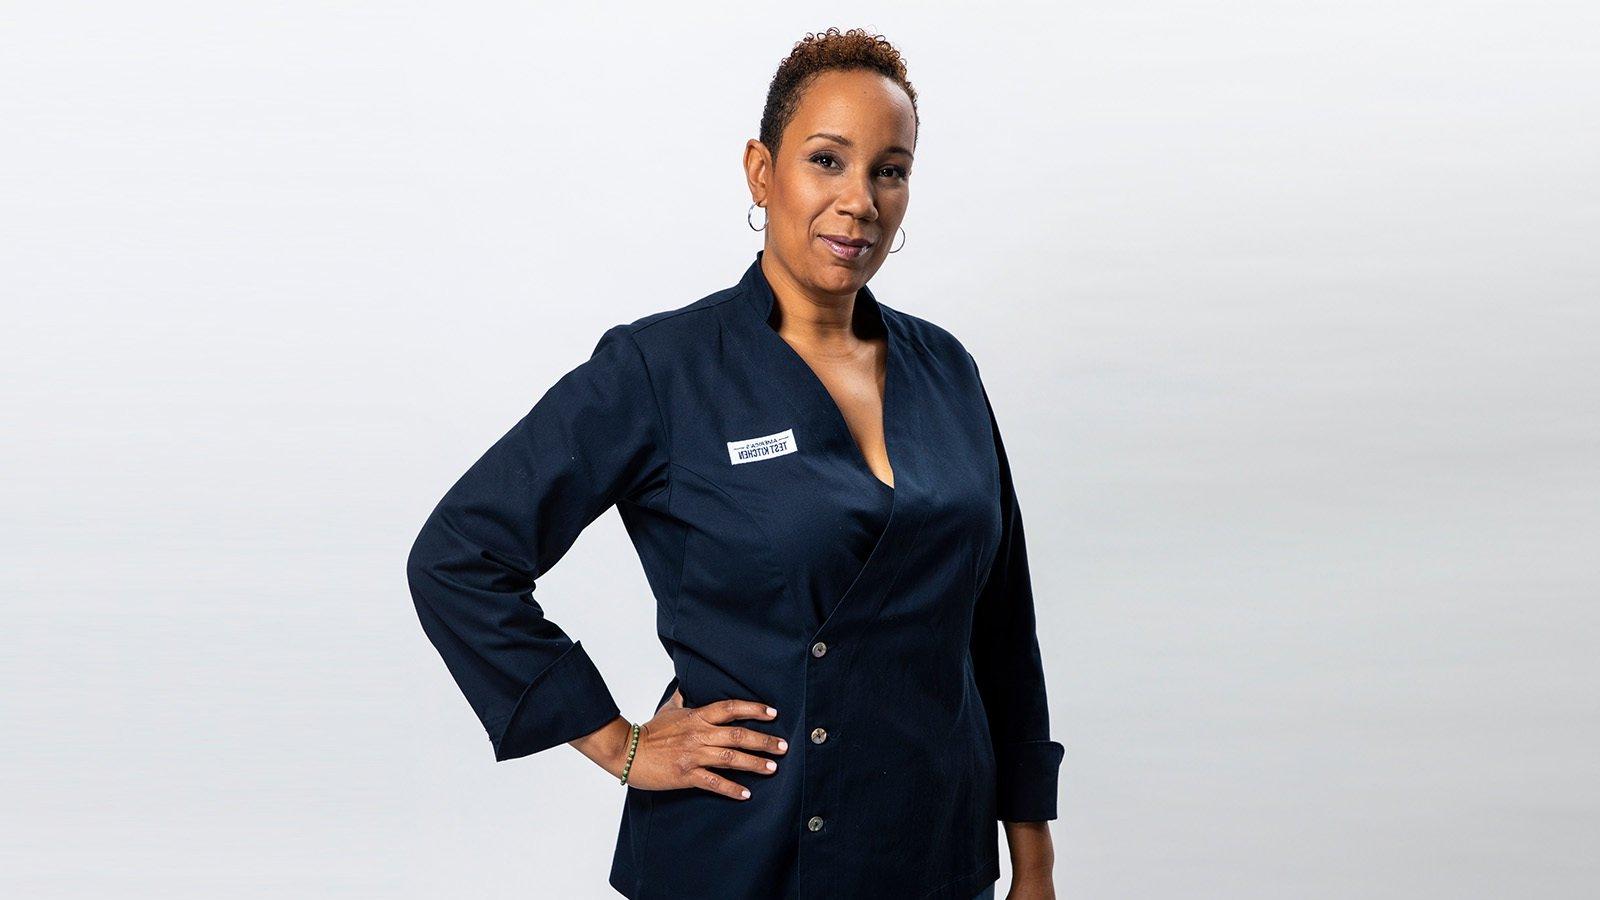 Grad Elle Simone Scott standing and smiling against a white backdrop while wearing a blue double-breasted chef's jacket with an America's Test Kitchen patch on the breast.